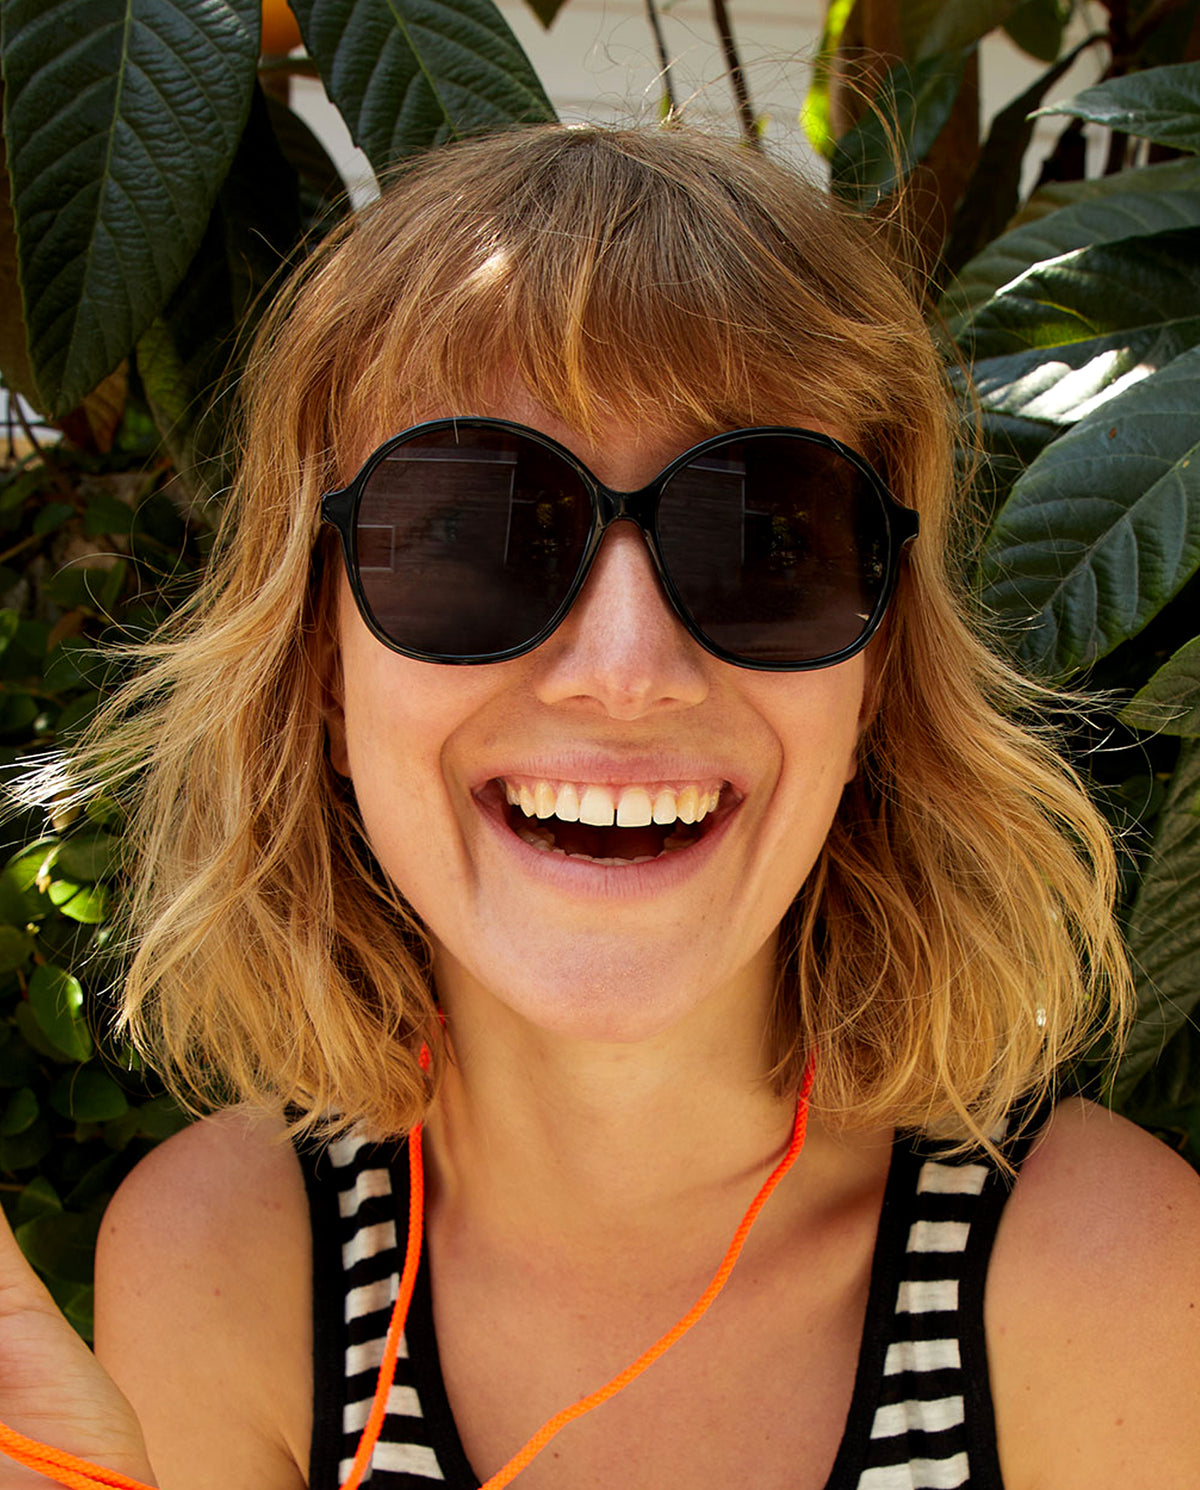 Lou wearing our Black Jane Sunglasses and smiling. 